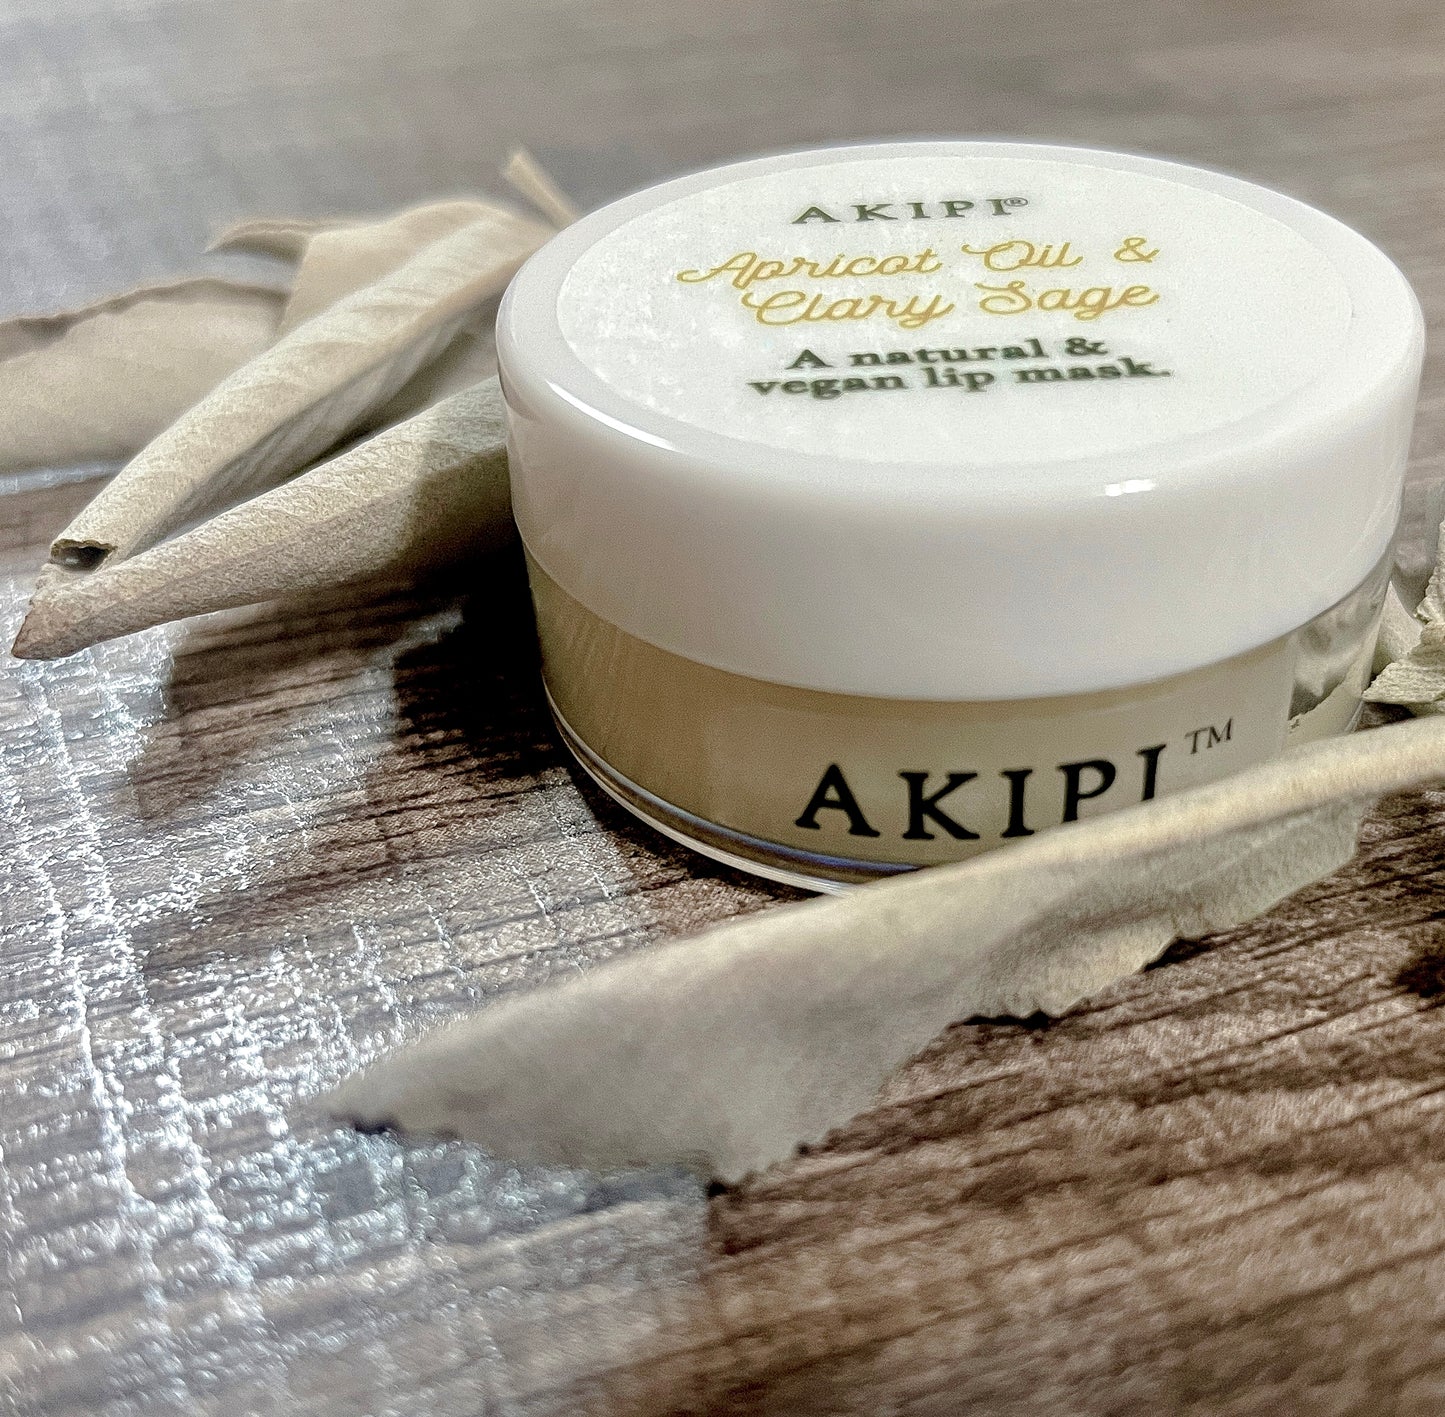 Apricot Oil & Clary Sage Lip Mask